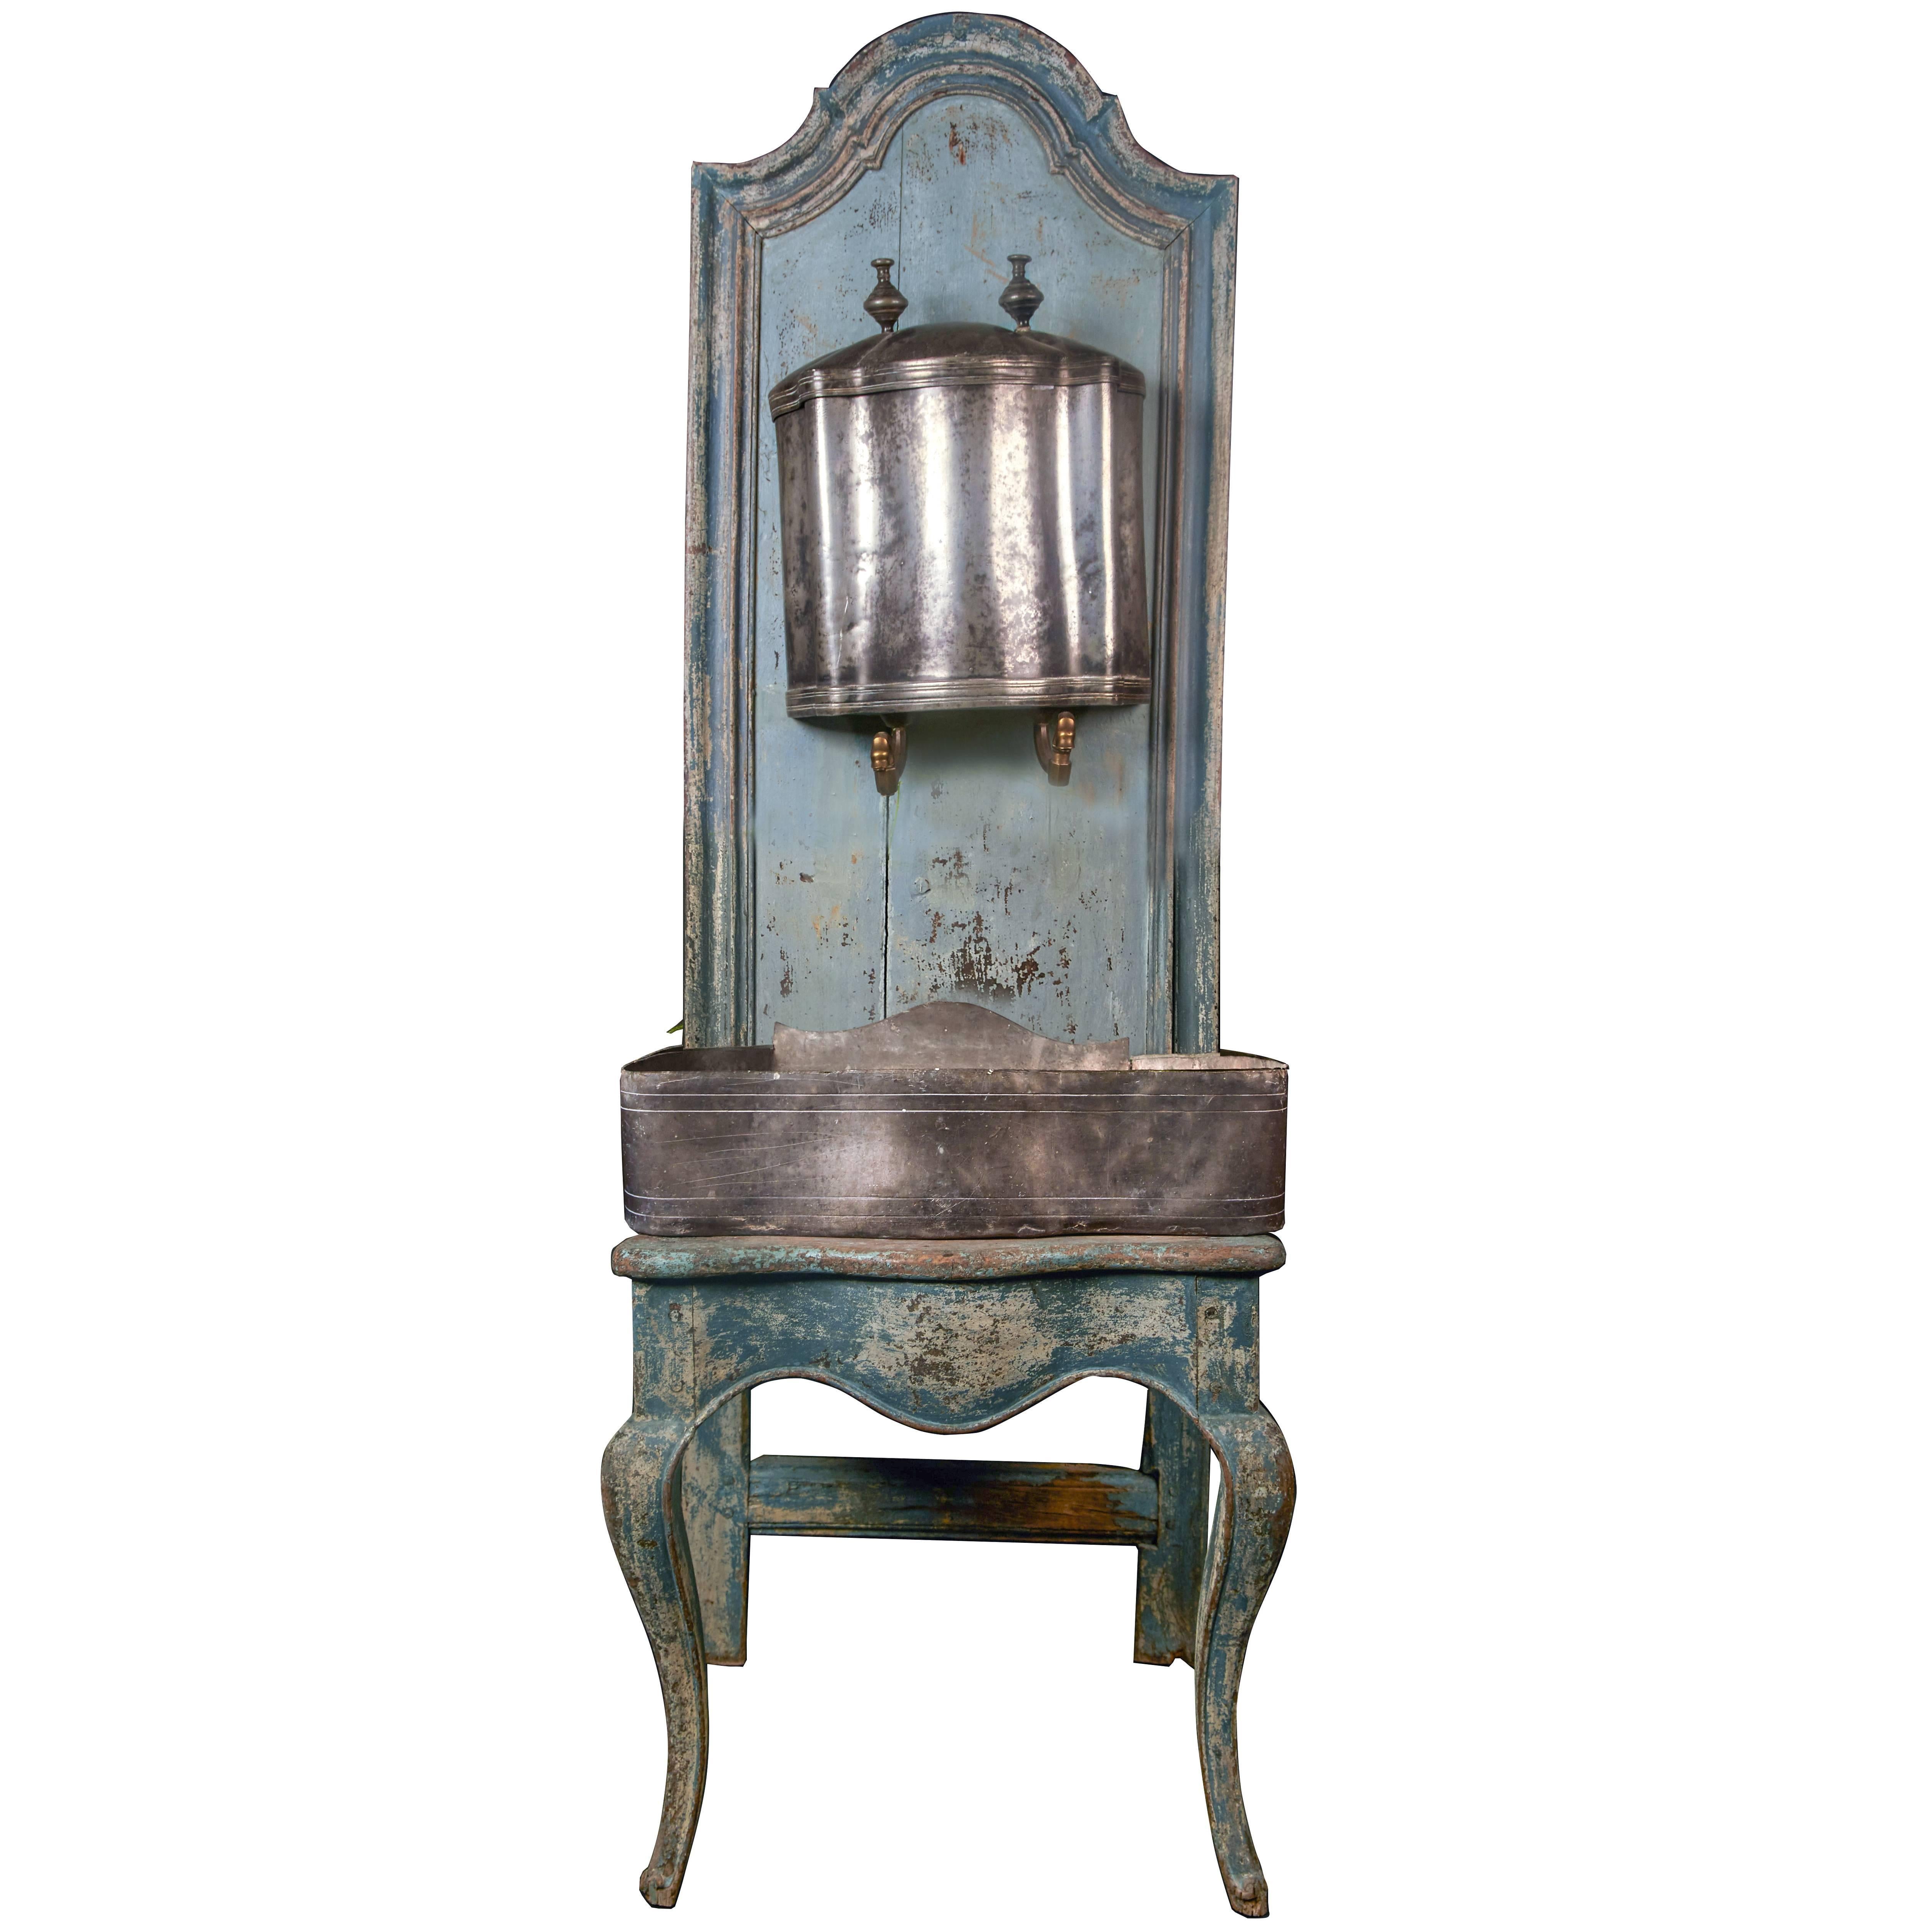 A rare Louis XV wooden throne with zinc water font, 18th century